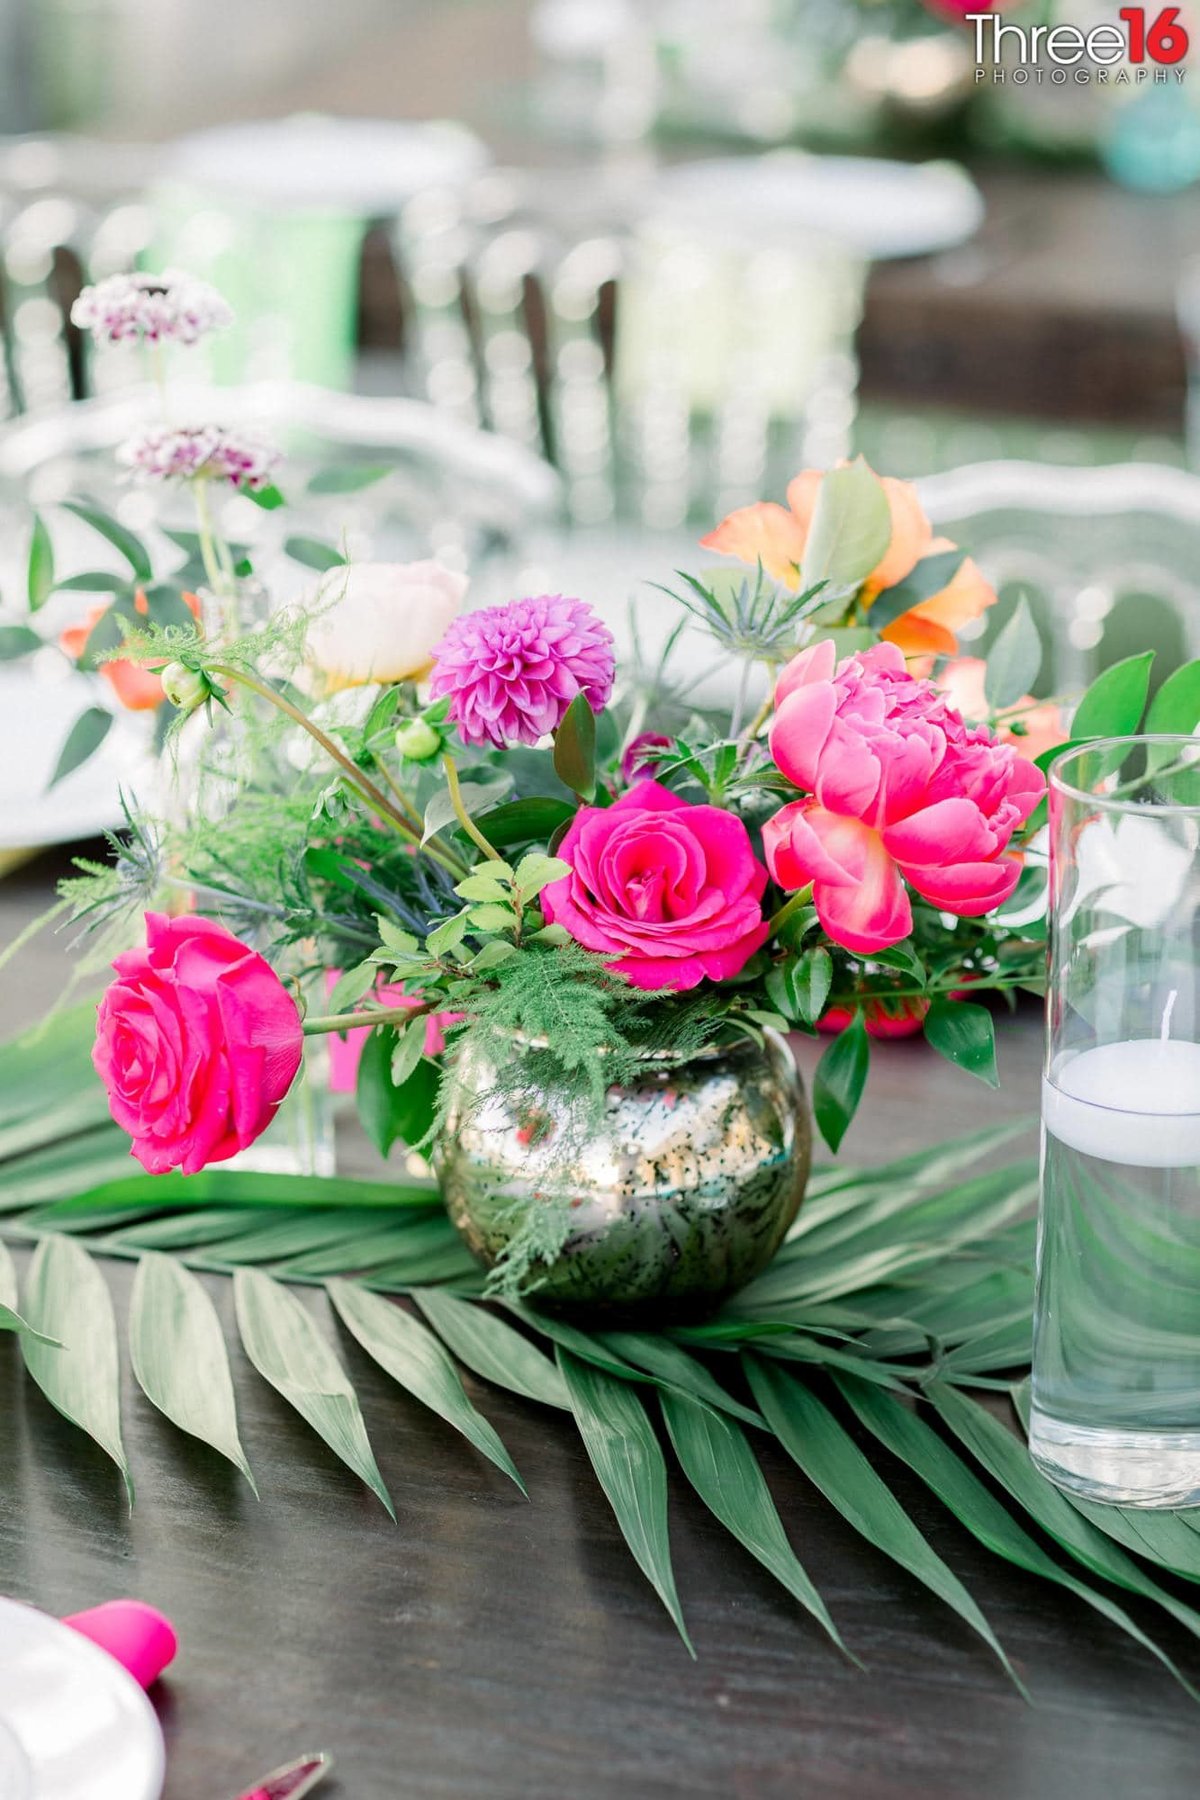 Beautiful flowers laying on the table in anticipation for a wedding reception